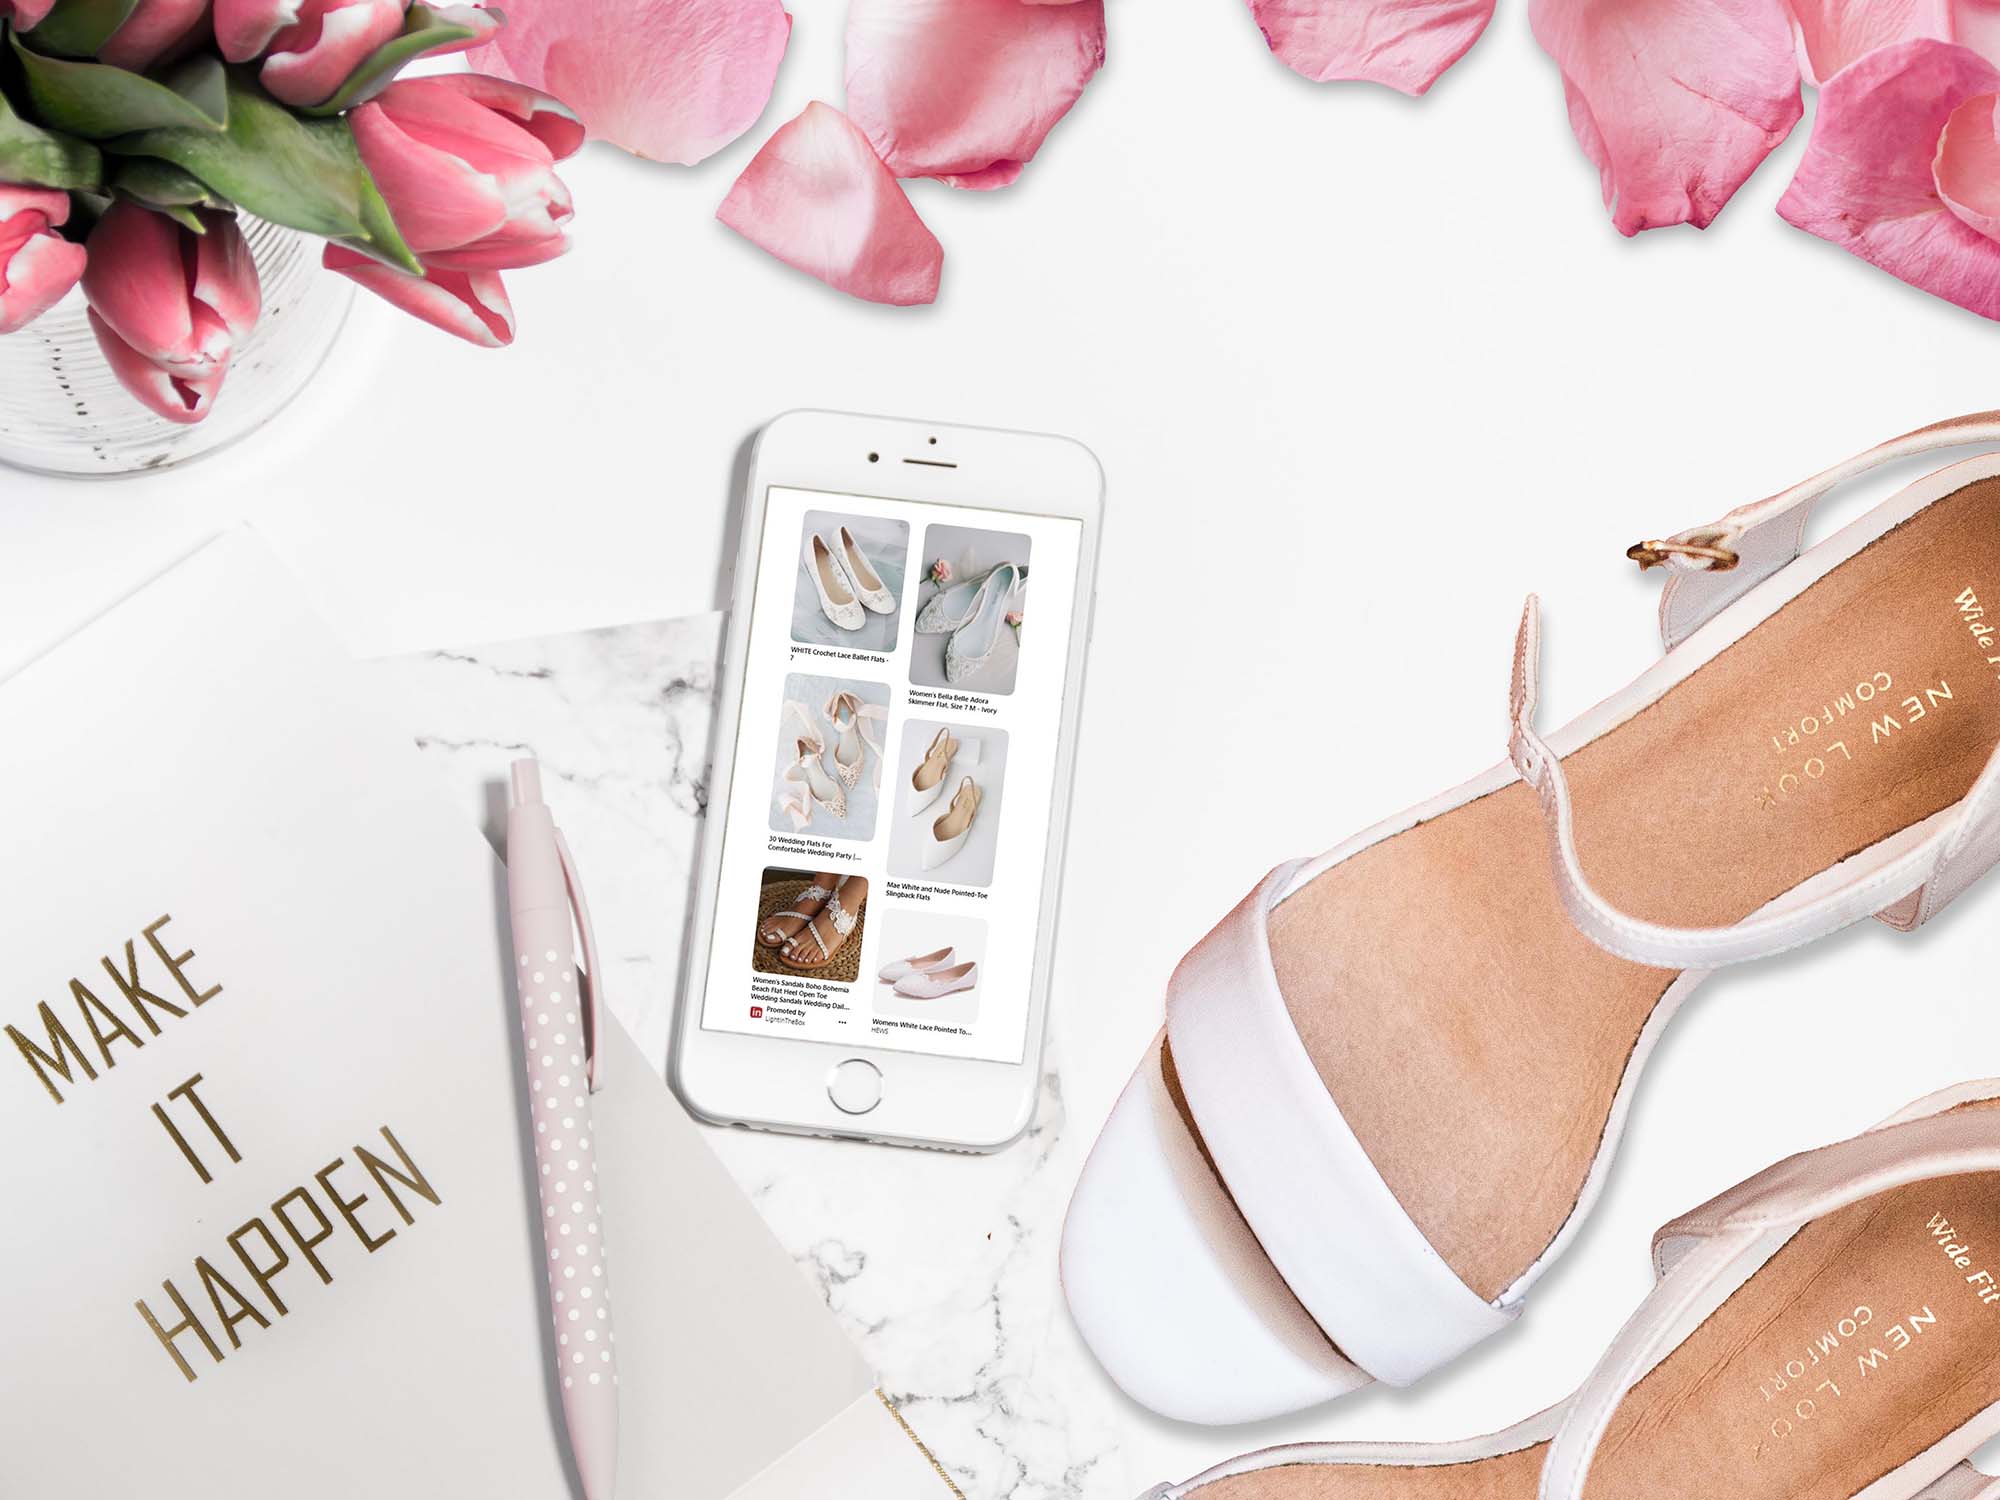 How to Find the Best Wedding Shoes for the Bride - Flats